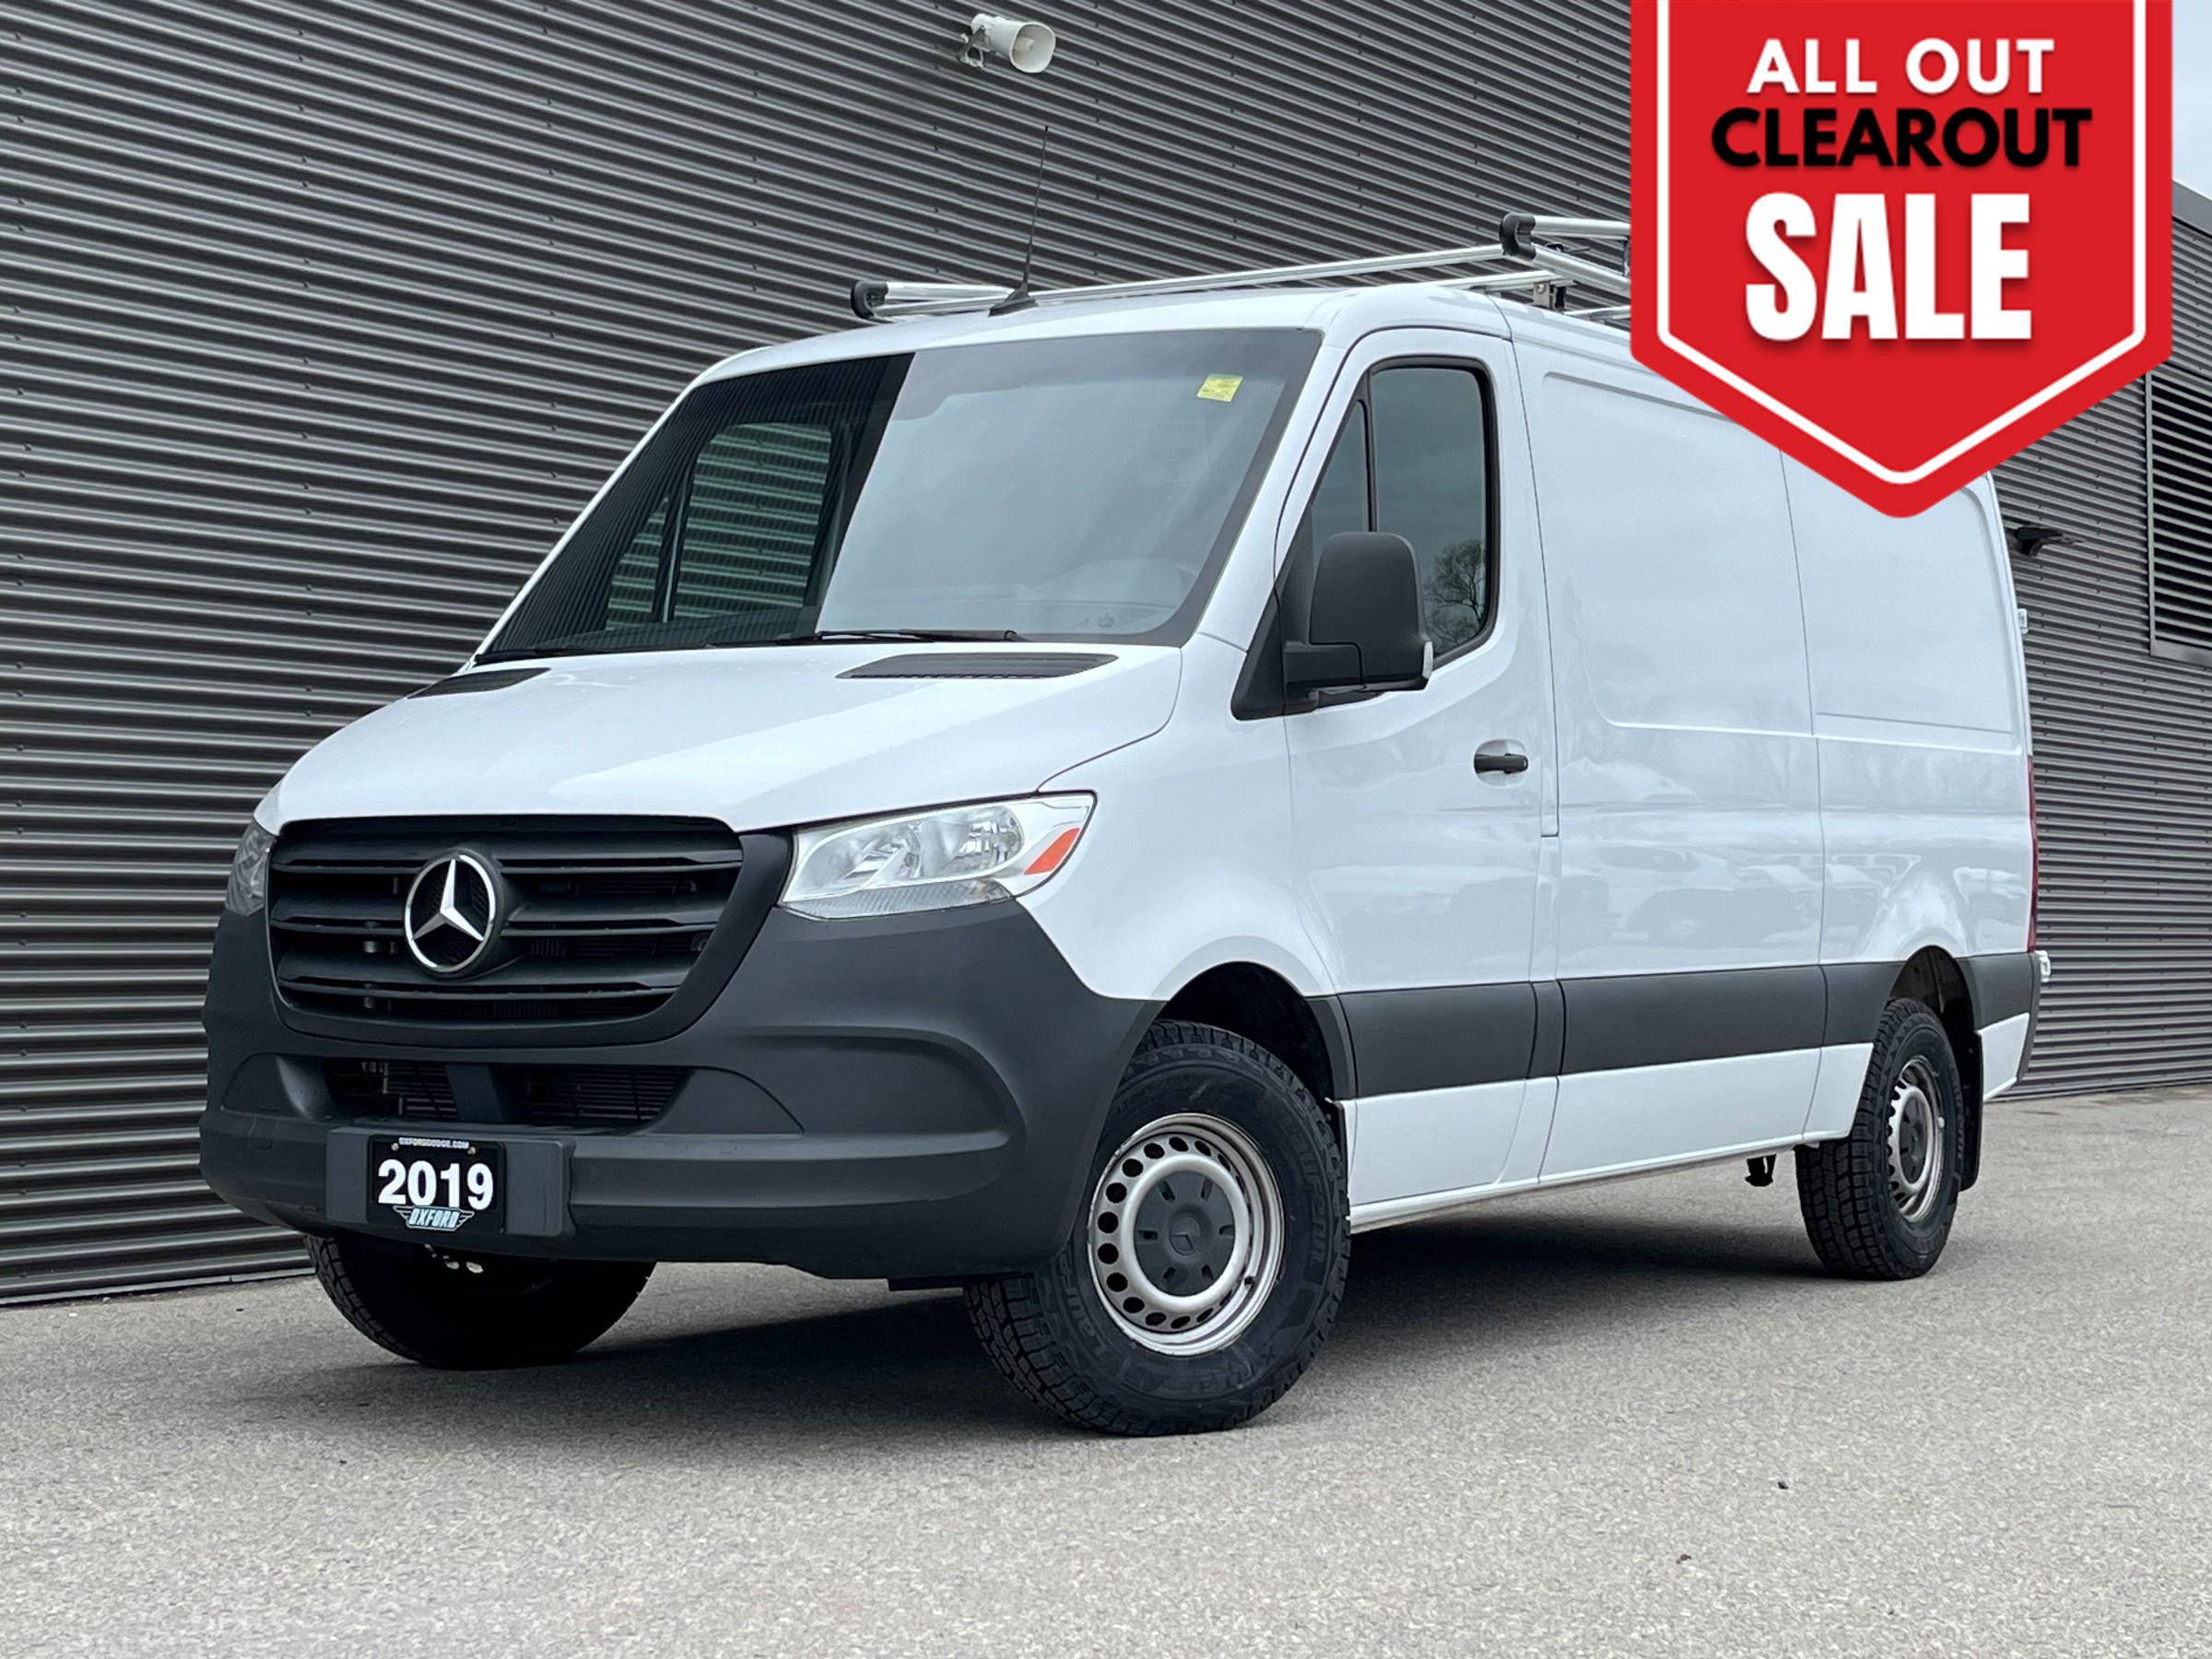 2019 Mercedes-Benz Sprinter 2500 Very Clean, Inside Racks, Well Maintained